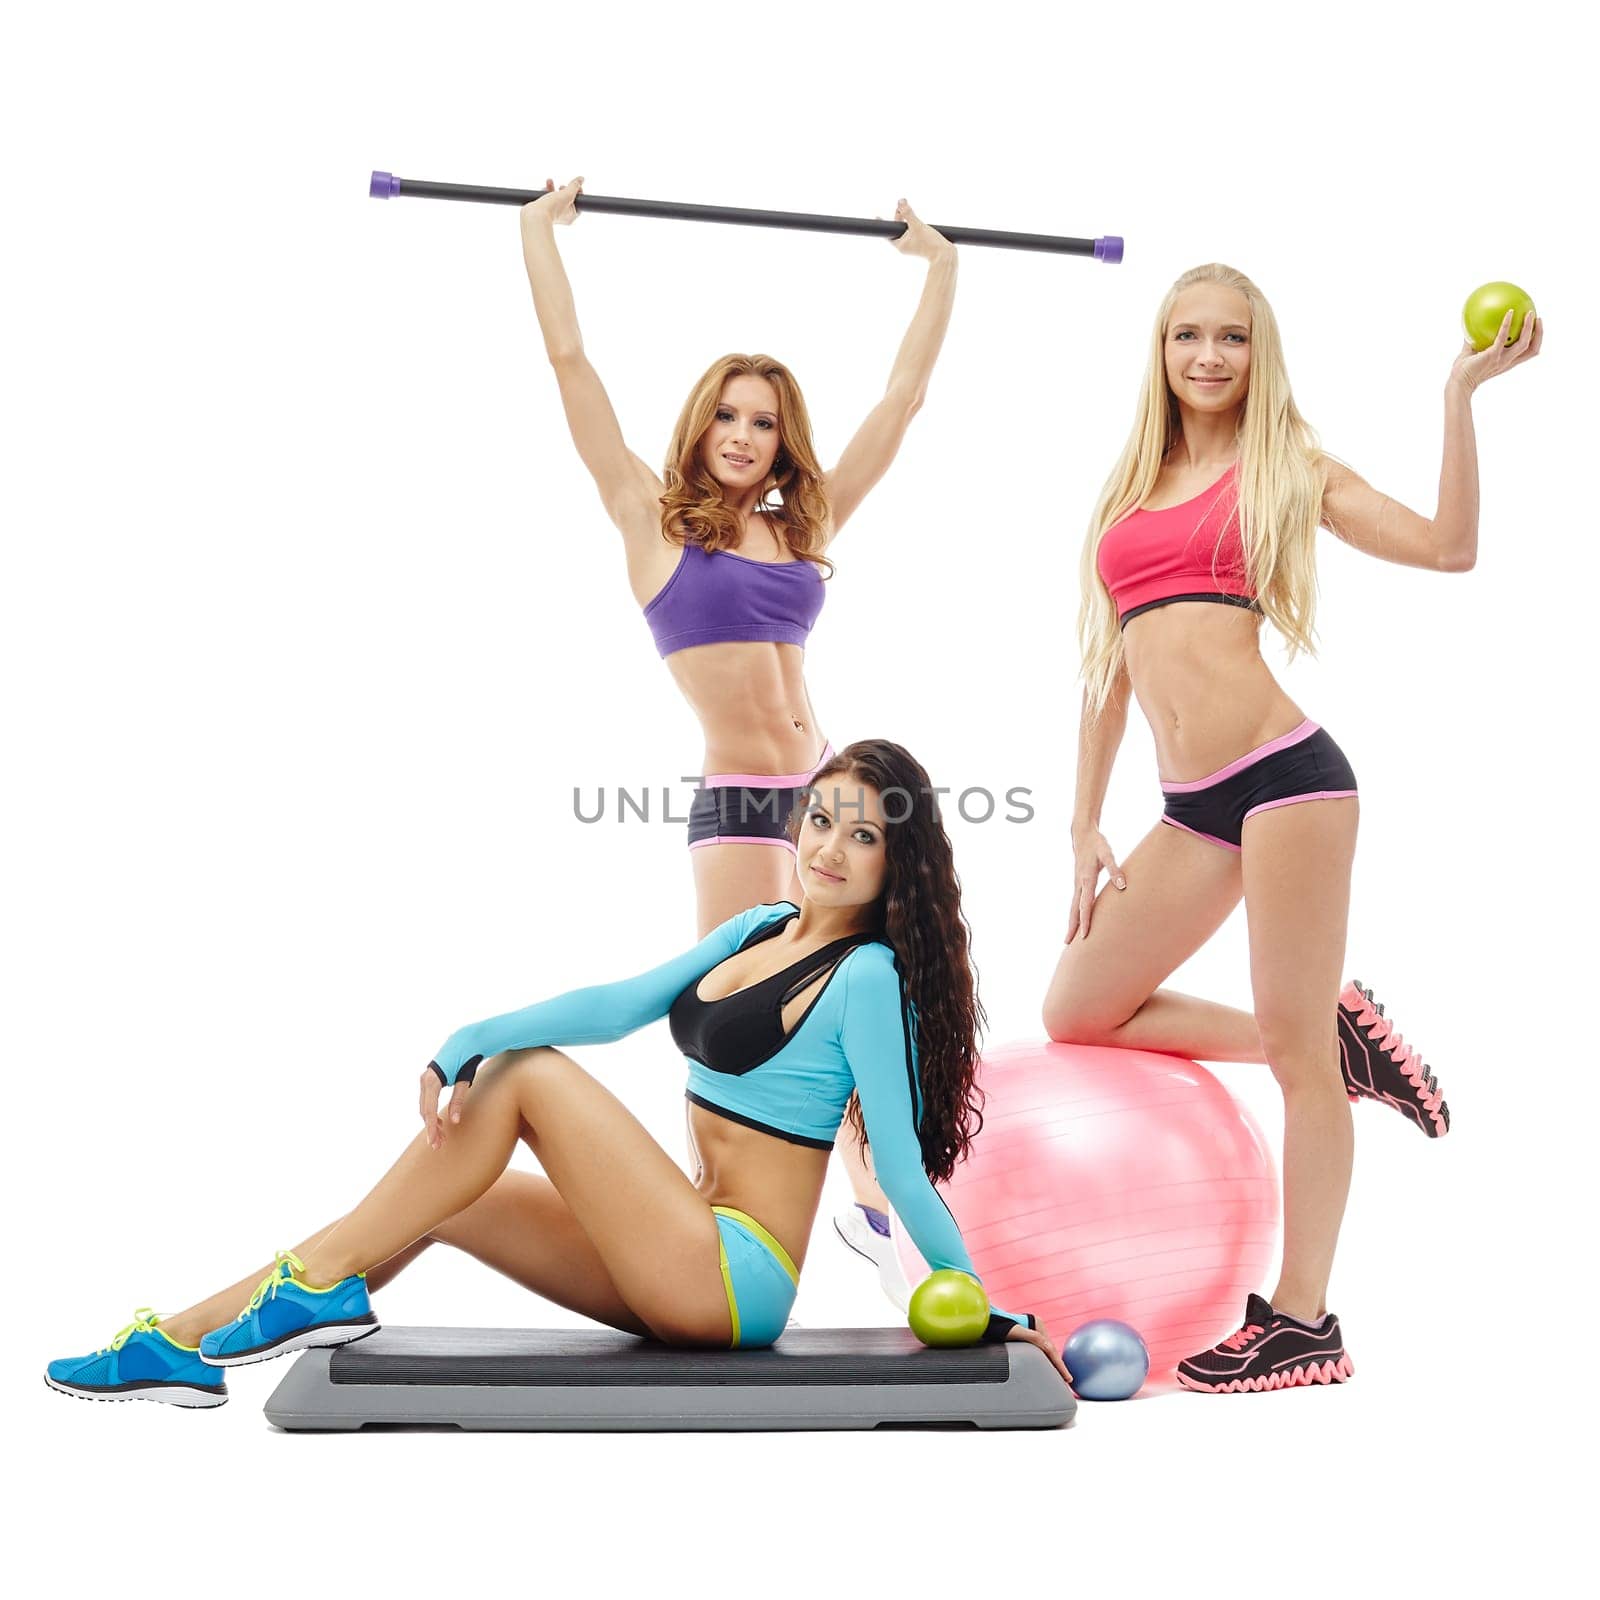 Charming young women posing with sports equipment by rivertime